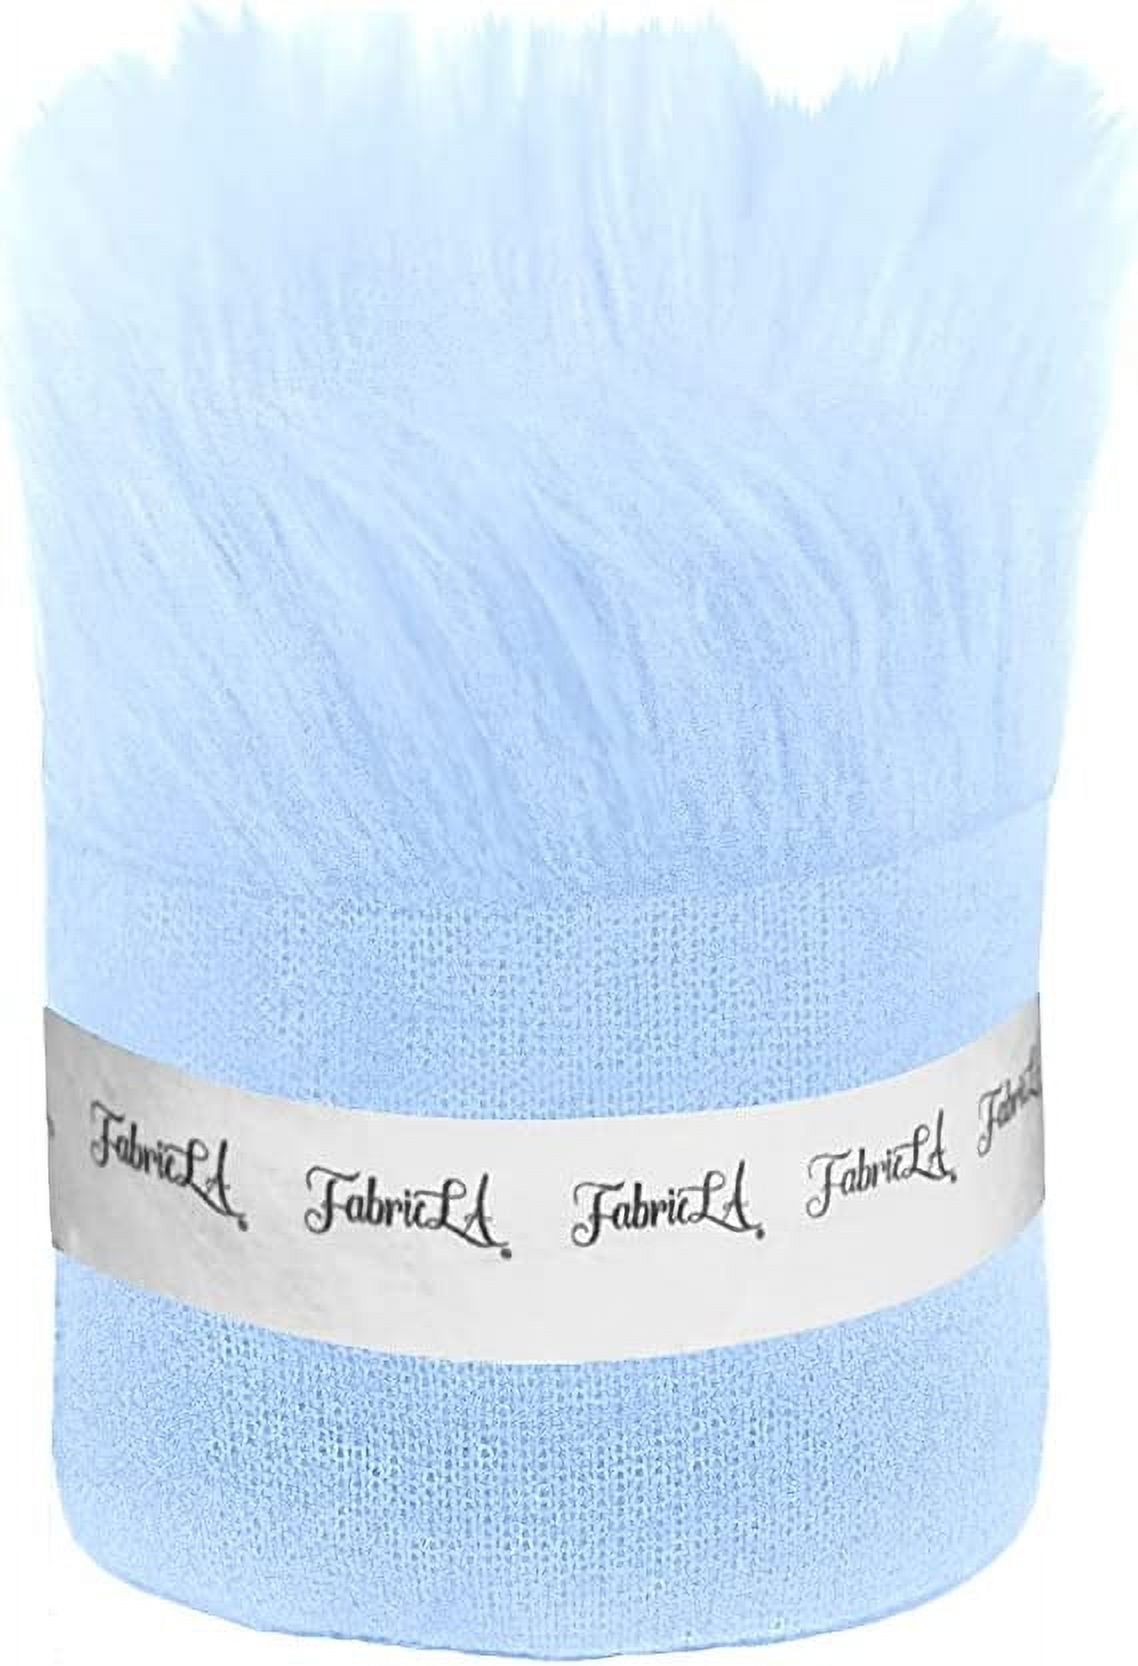 Ice Fabrics Shaggy Mohair Faux Fur Fabric Strips Ribbon, Pre Cut Roll, 2 inch Wide by 60 inch Long - Baby Blue, Size: 2 x 60